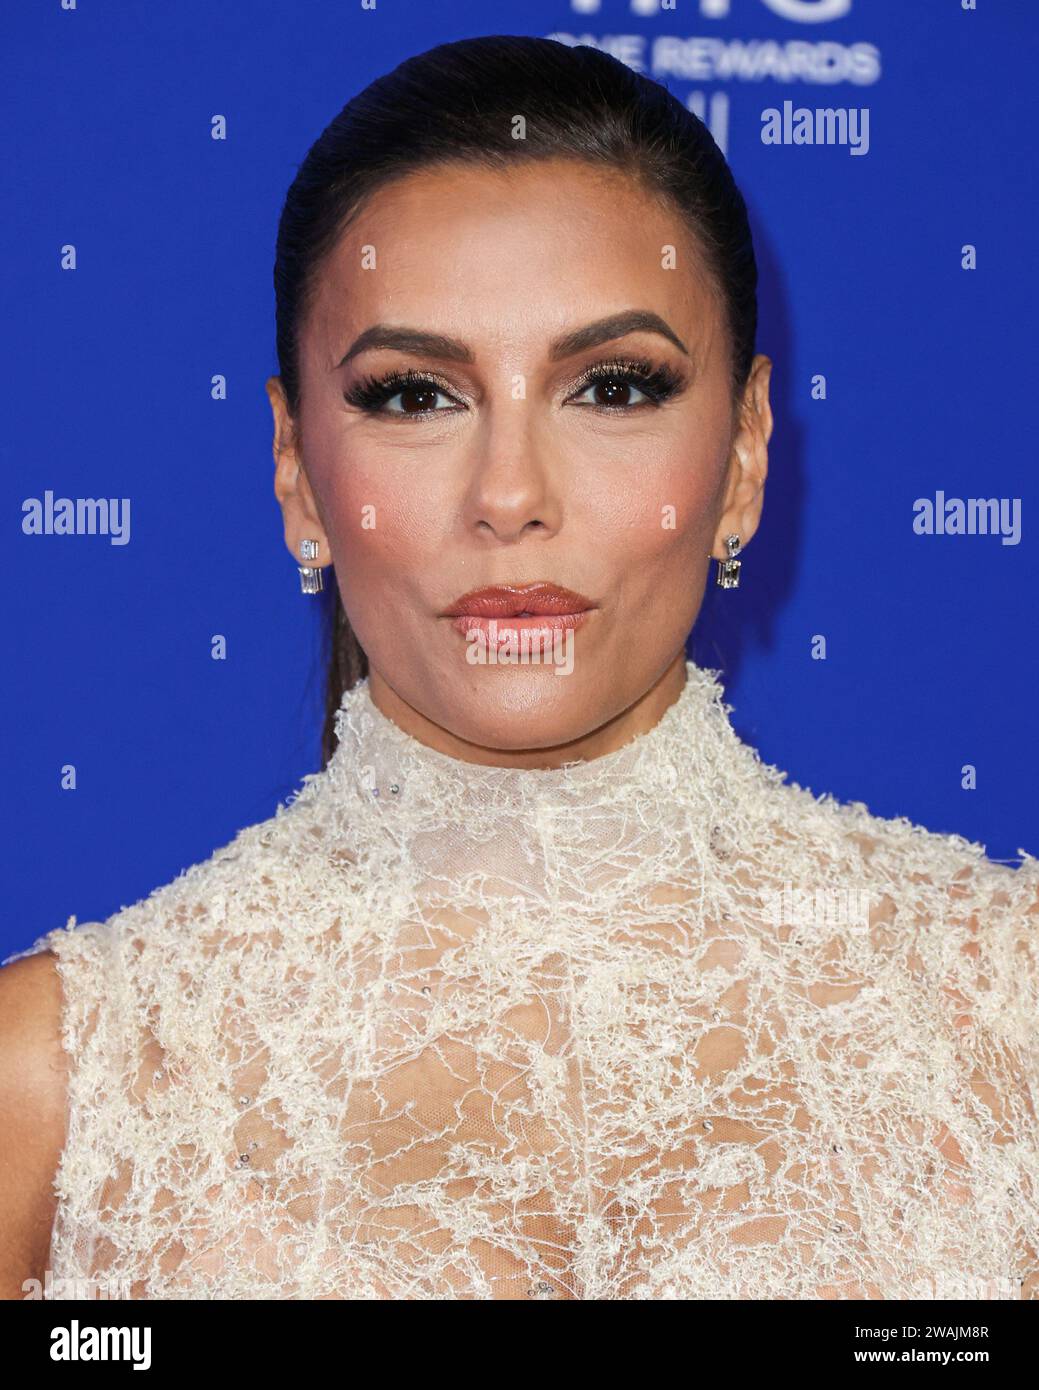 PALM SPRINGS, RIVERSIDE COUNTY, CALIFORNIA, USA - JANUARY 04: Eva Longoria arrives at the 35th Annual Palm Springs International Film Festival Film Awards held at the Palm Springs Convention Center on January 4, 2024 in Palm Springs, Riverside County, California, United States. (Photo by Xavier Collin/Image Press Agency) Stock Photo